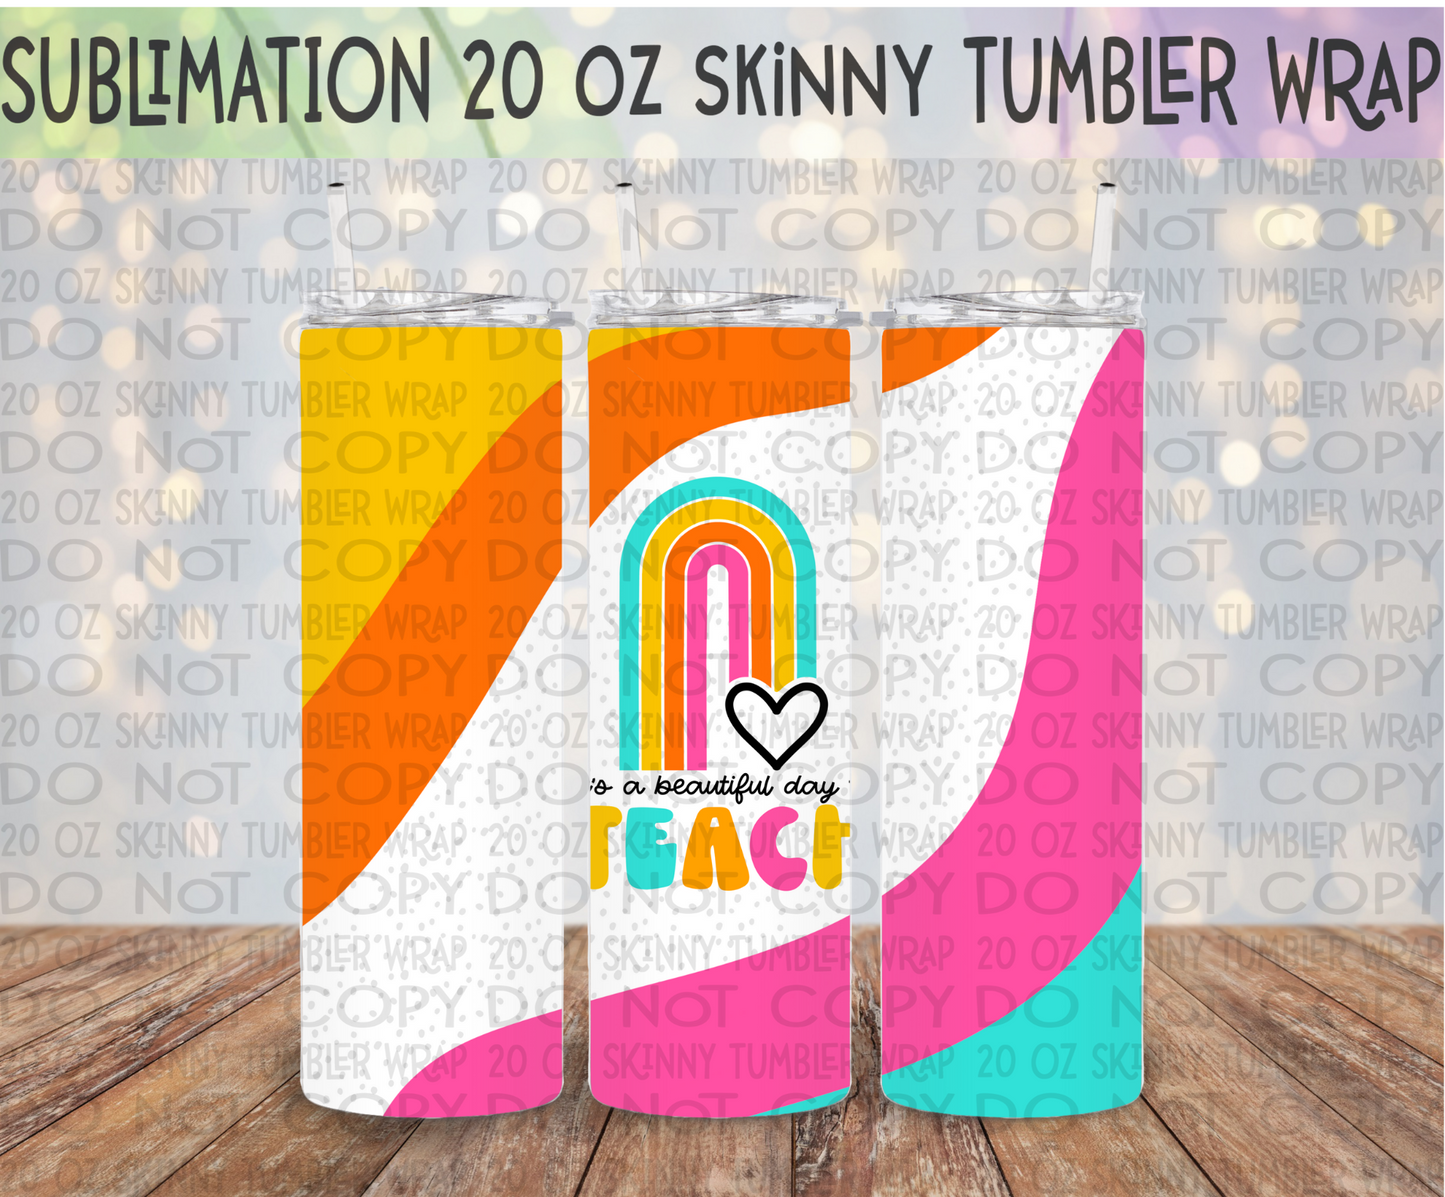 It's a Beautiful Day to Teach 20 Oz Skinny Tumbler Wrap - Sublimation Transfer - RTS